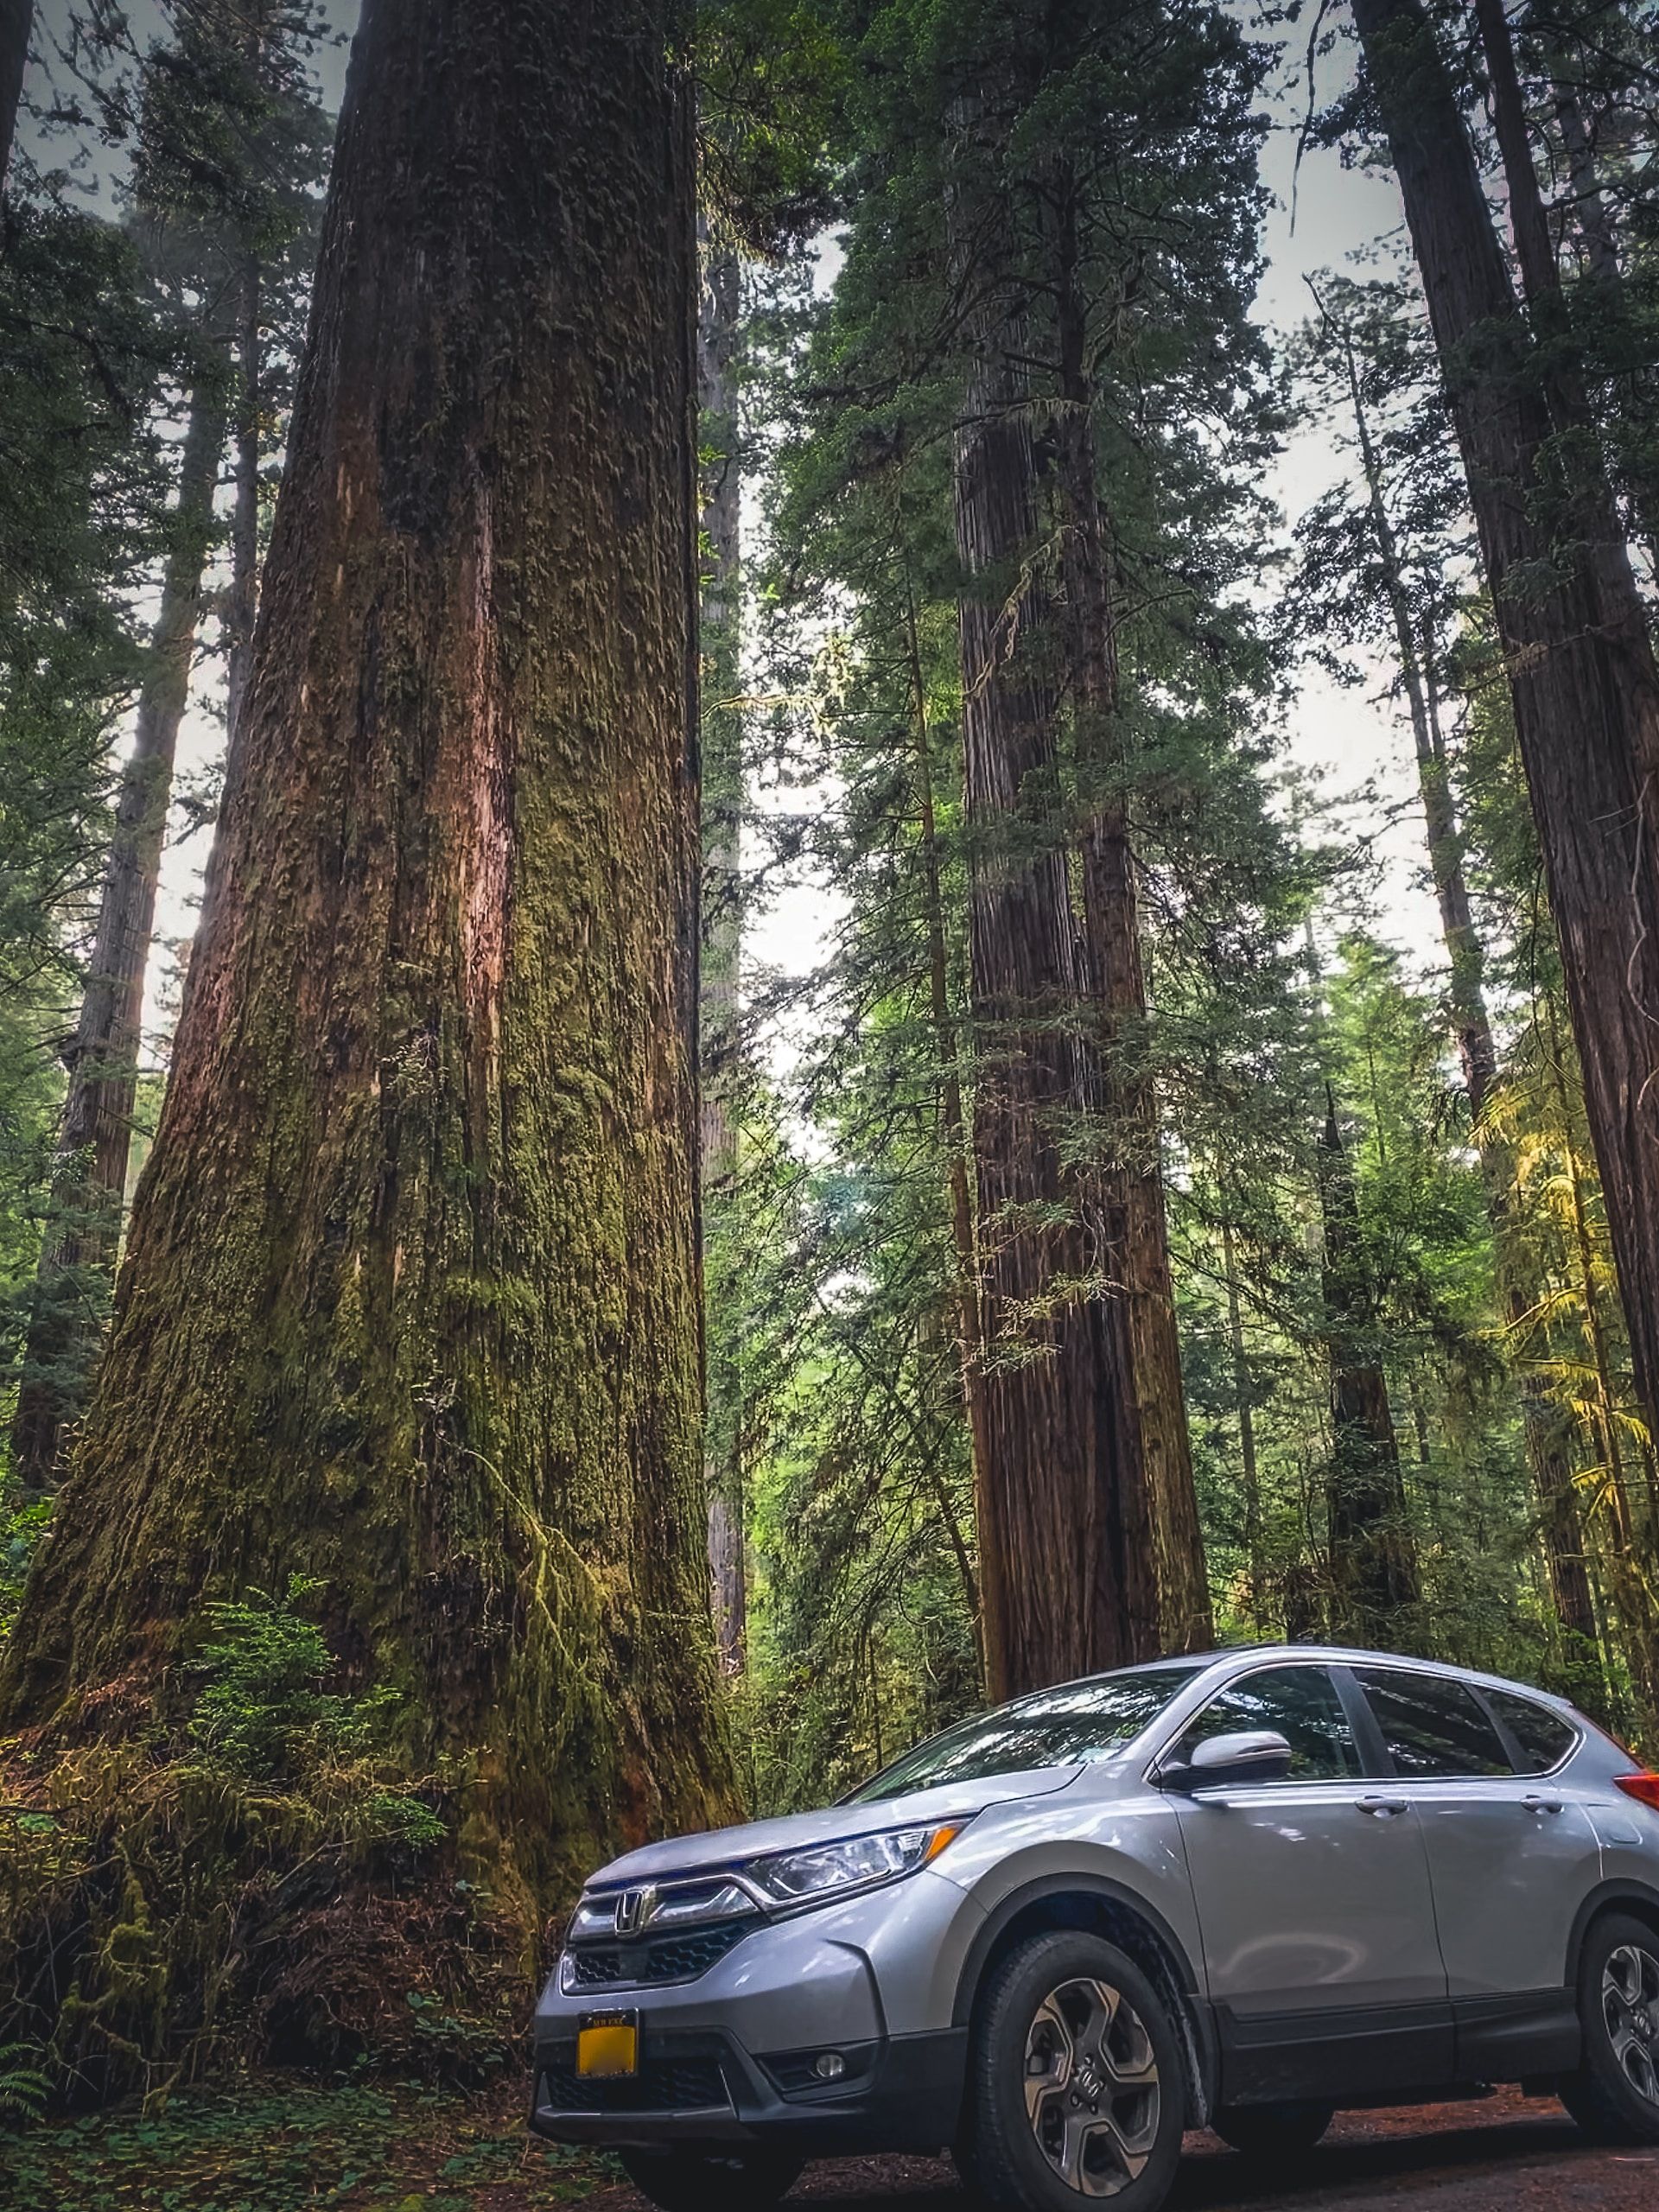 A car parked next to giant trees at Avenue of the Giants, Northern California